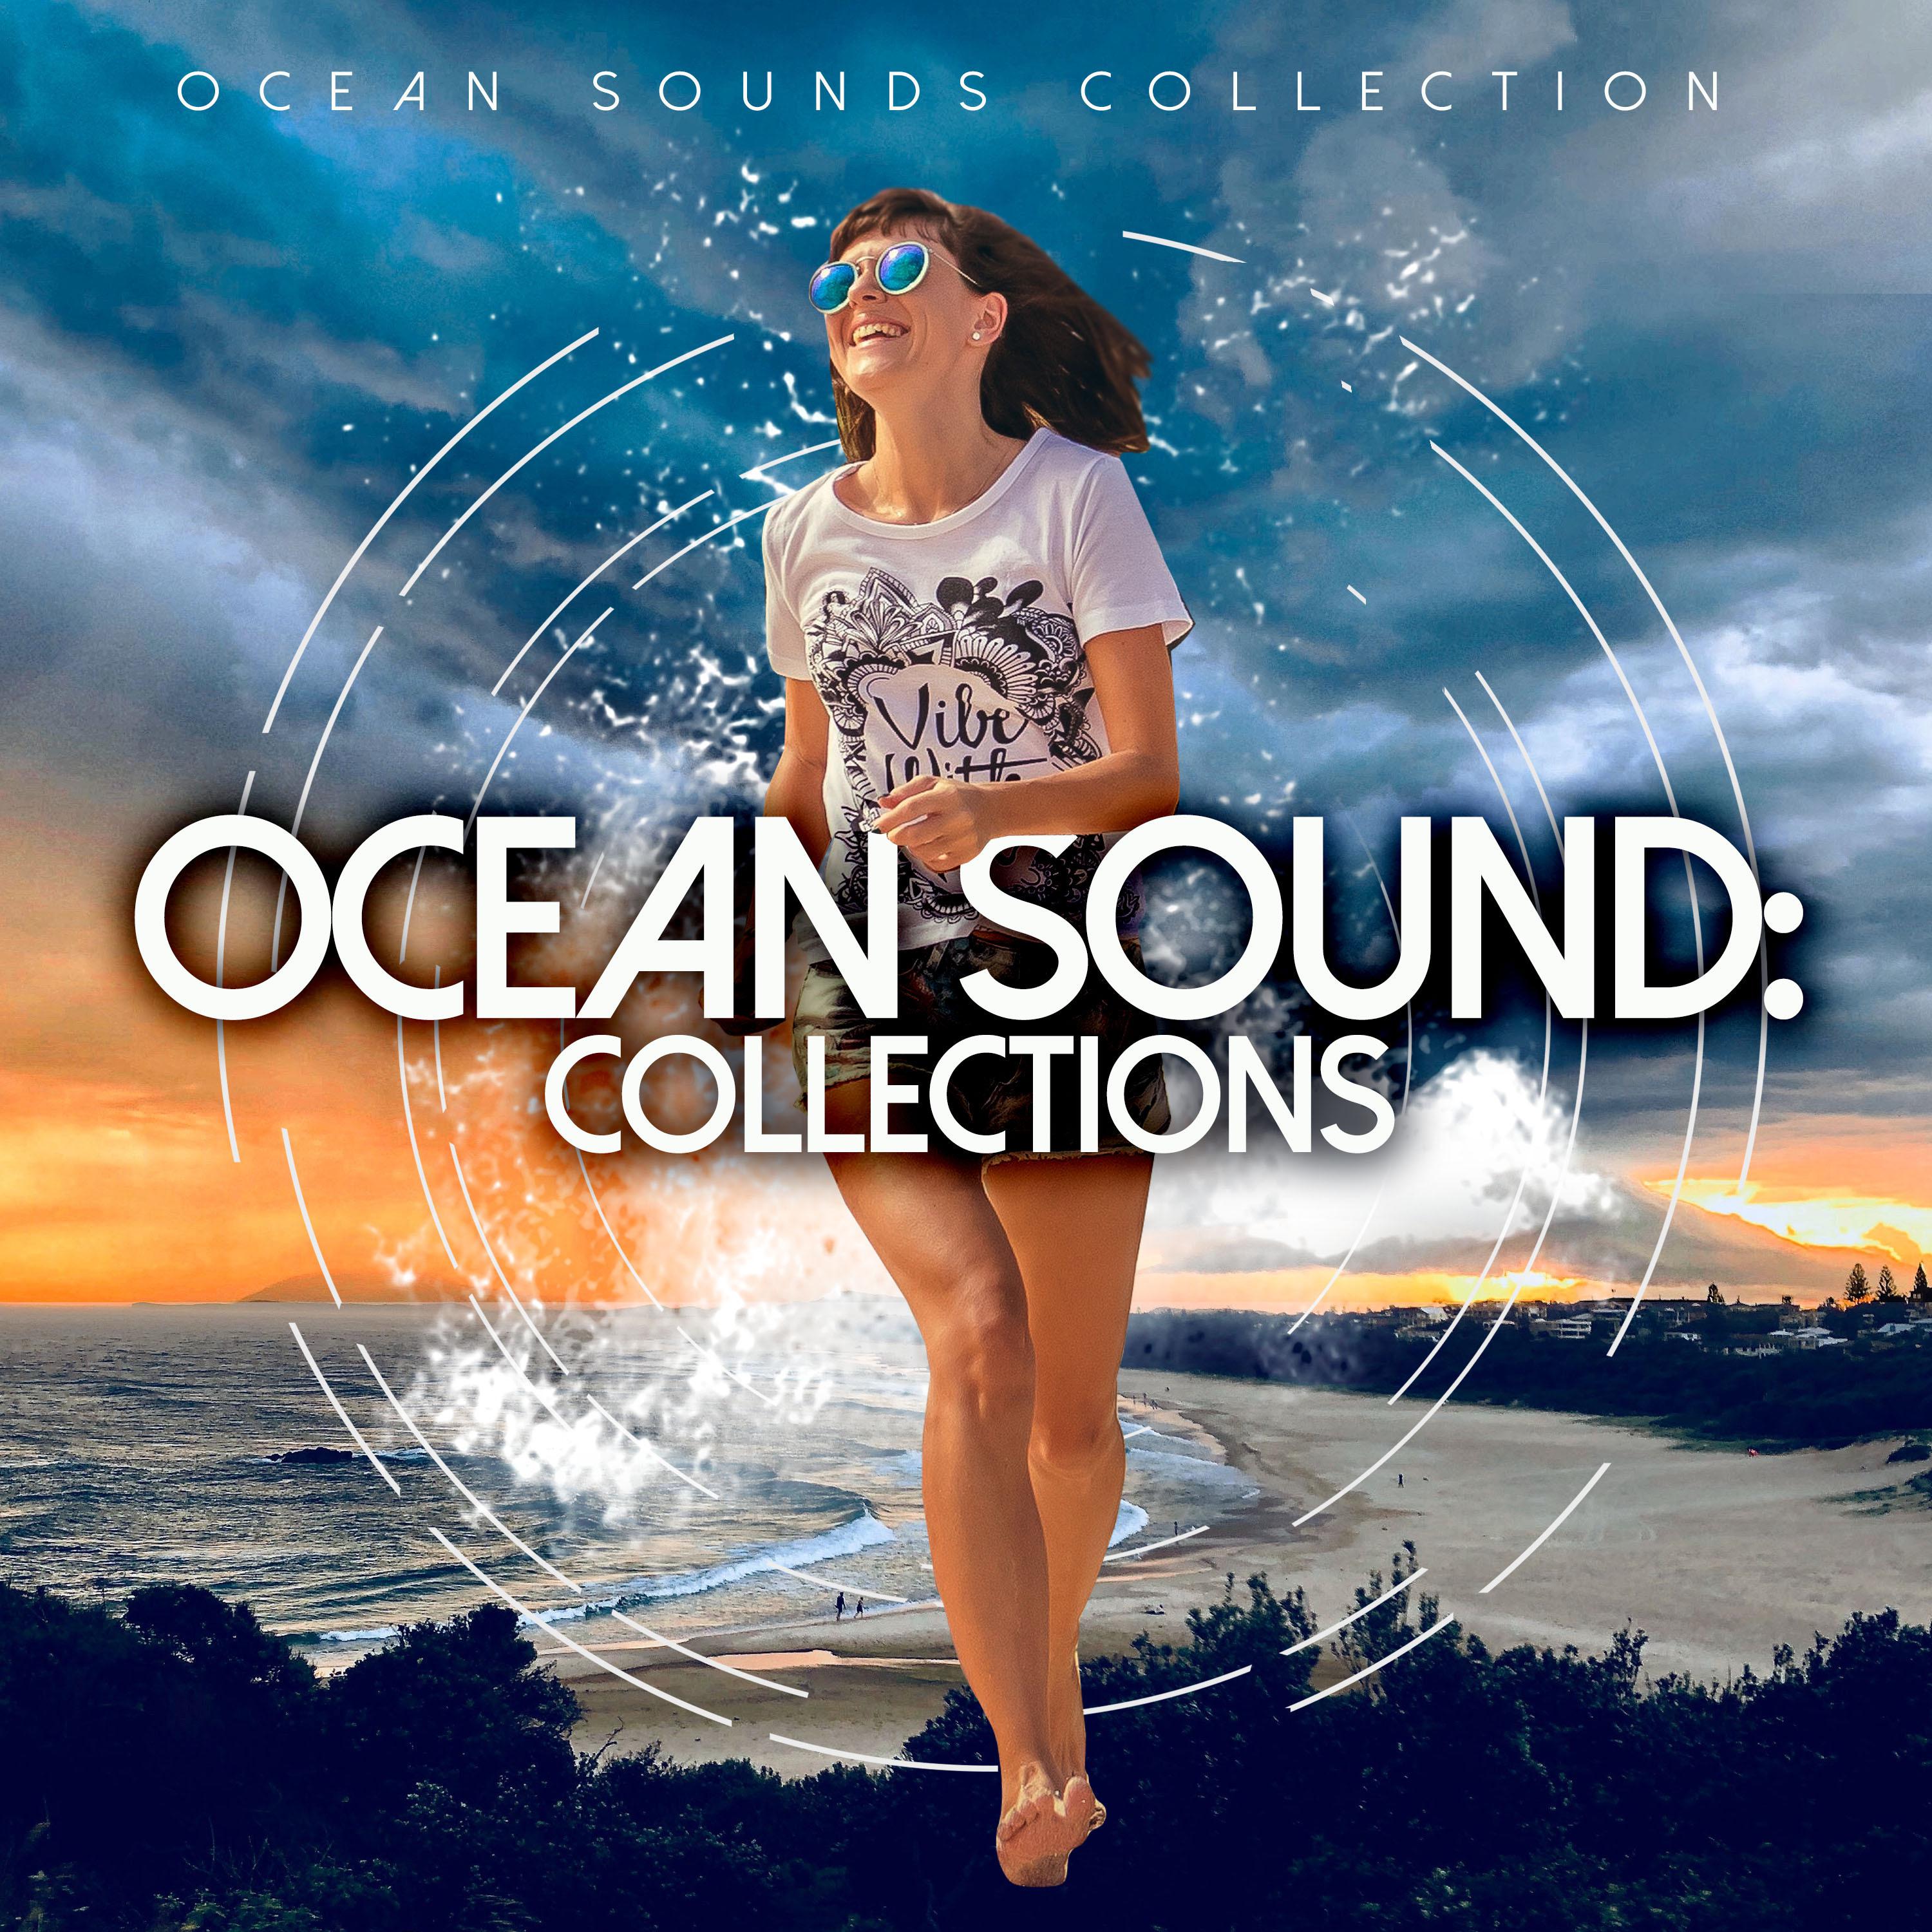 Ocean Sound: Collections